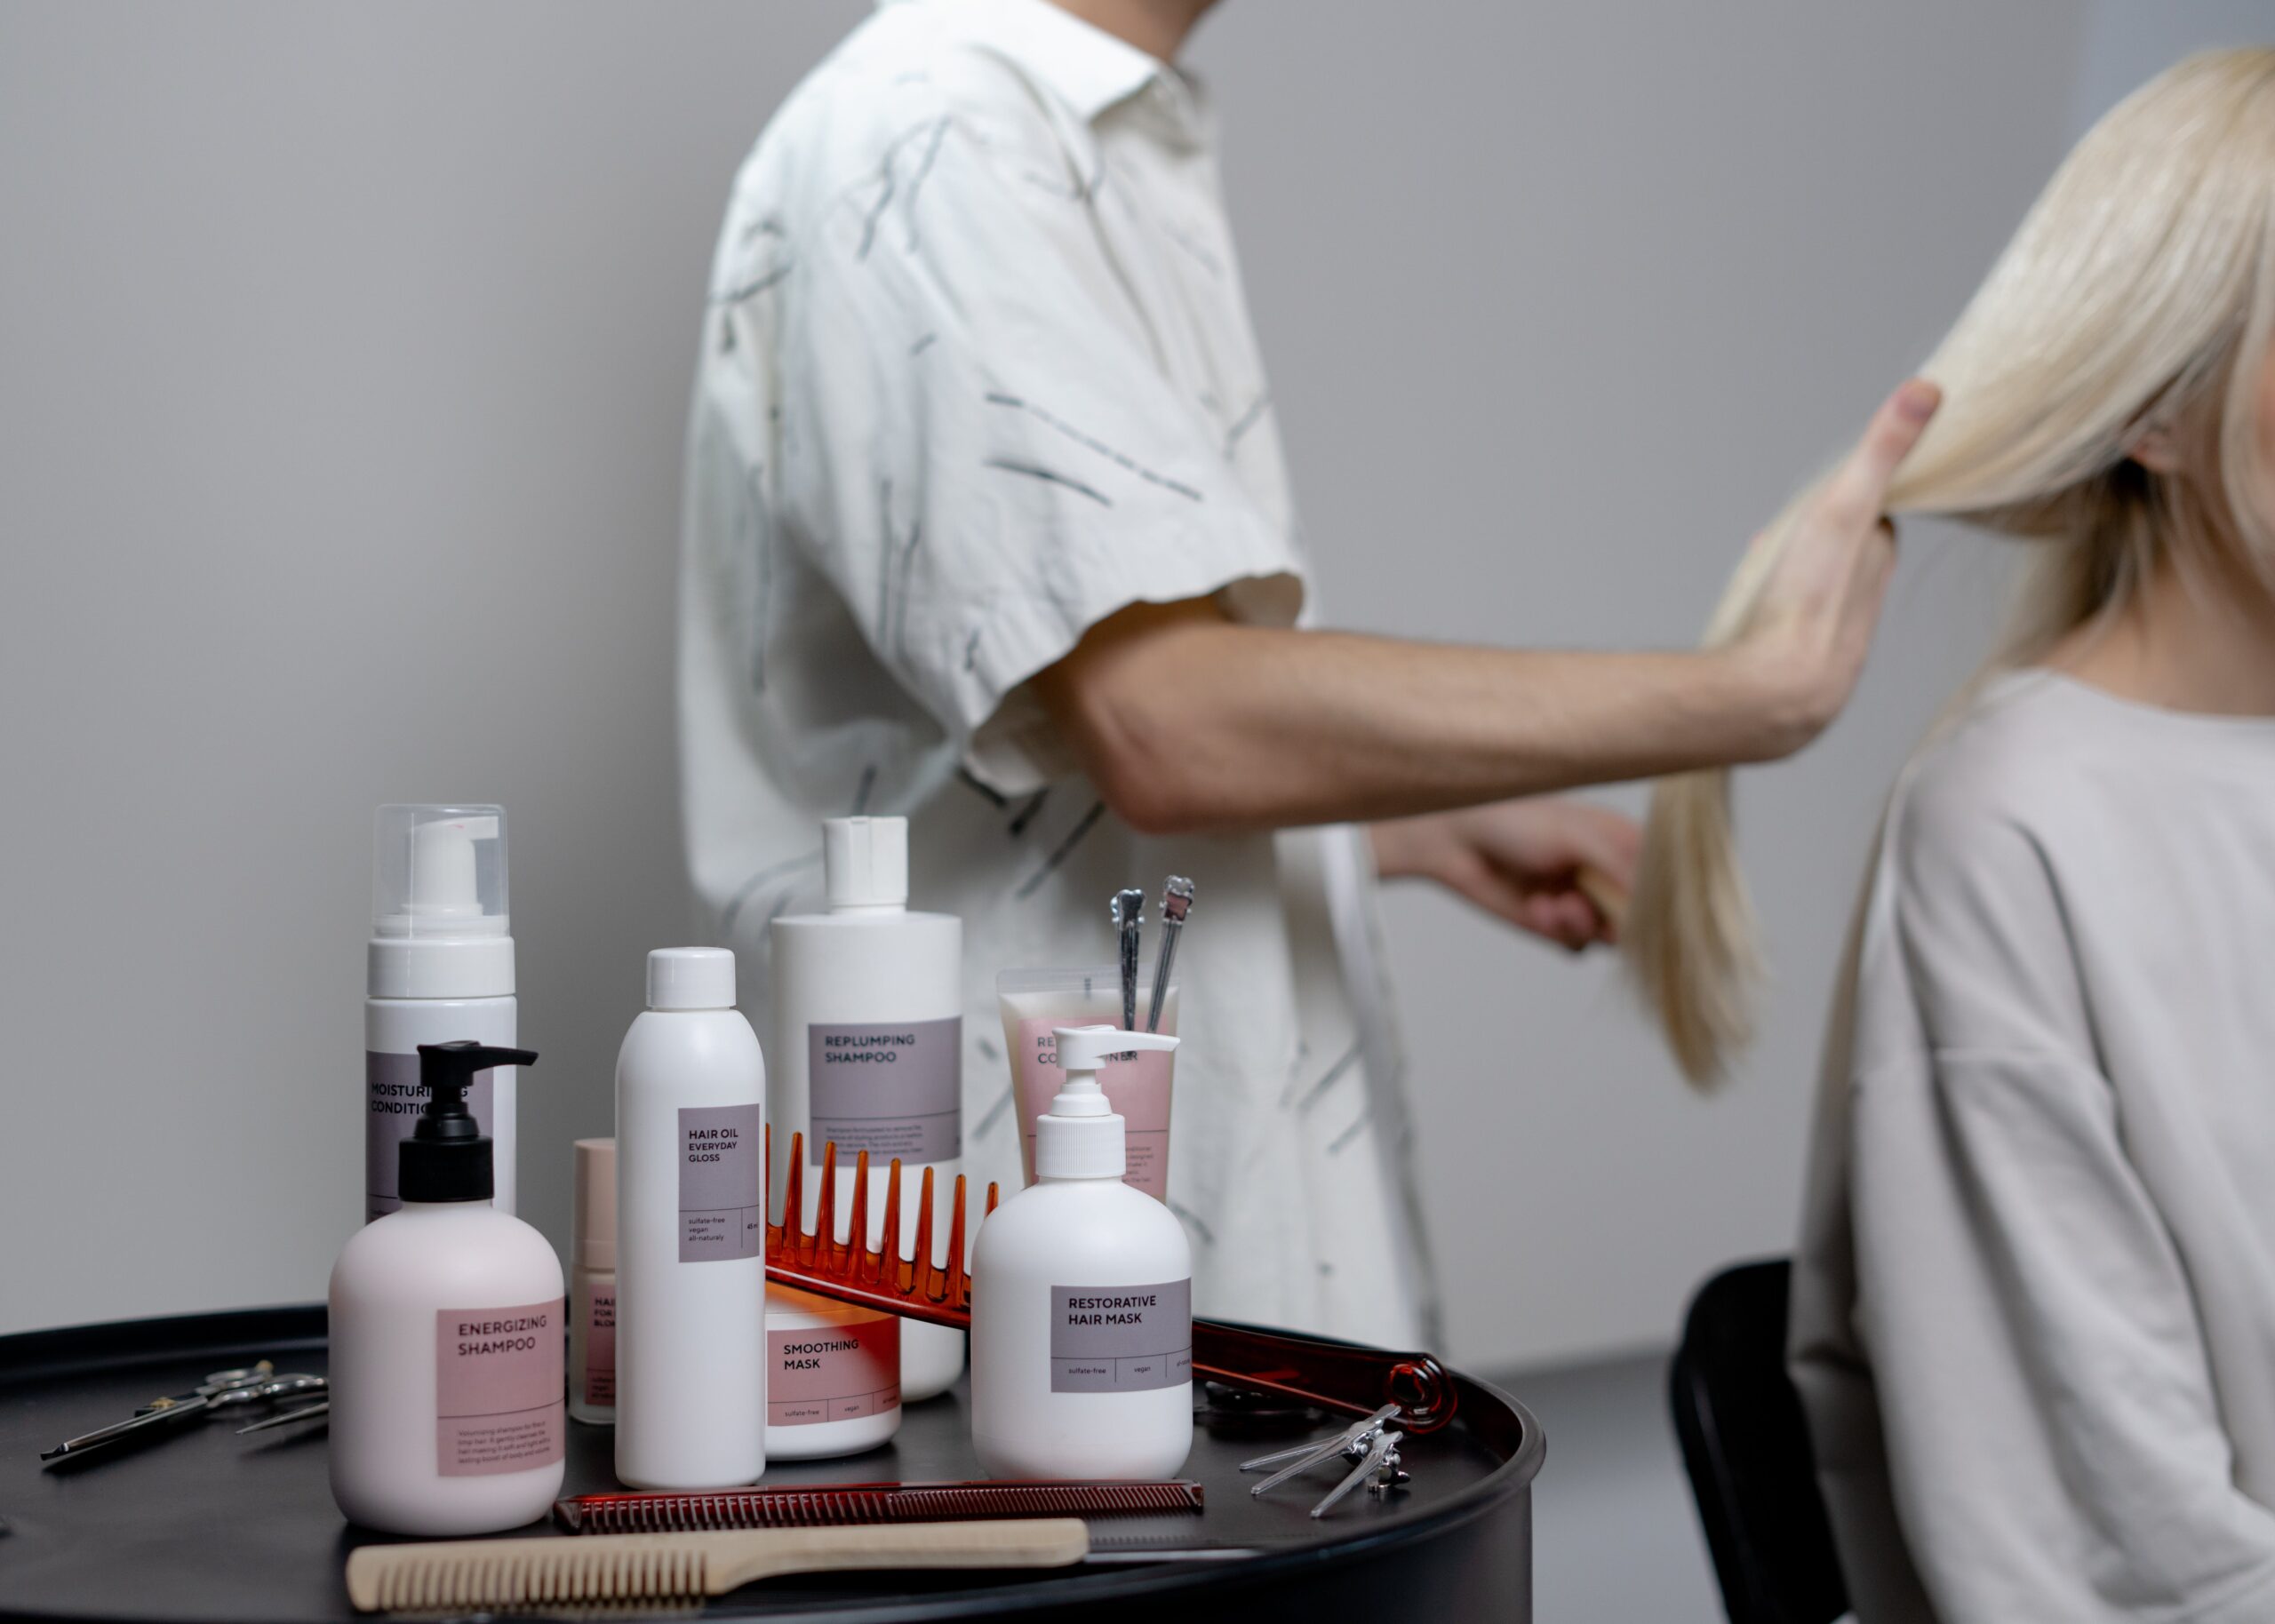 Ways to Handle the Aftermath of Hair Care Product Blunders